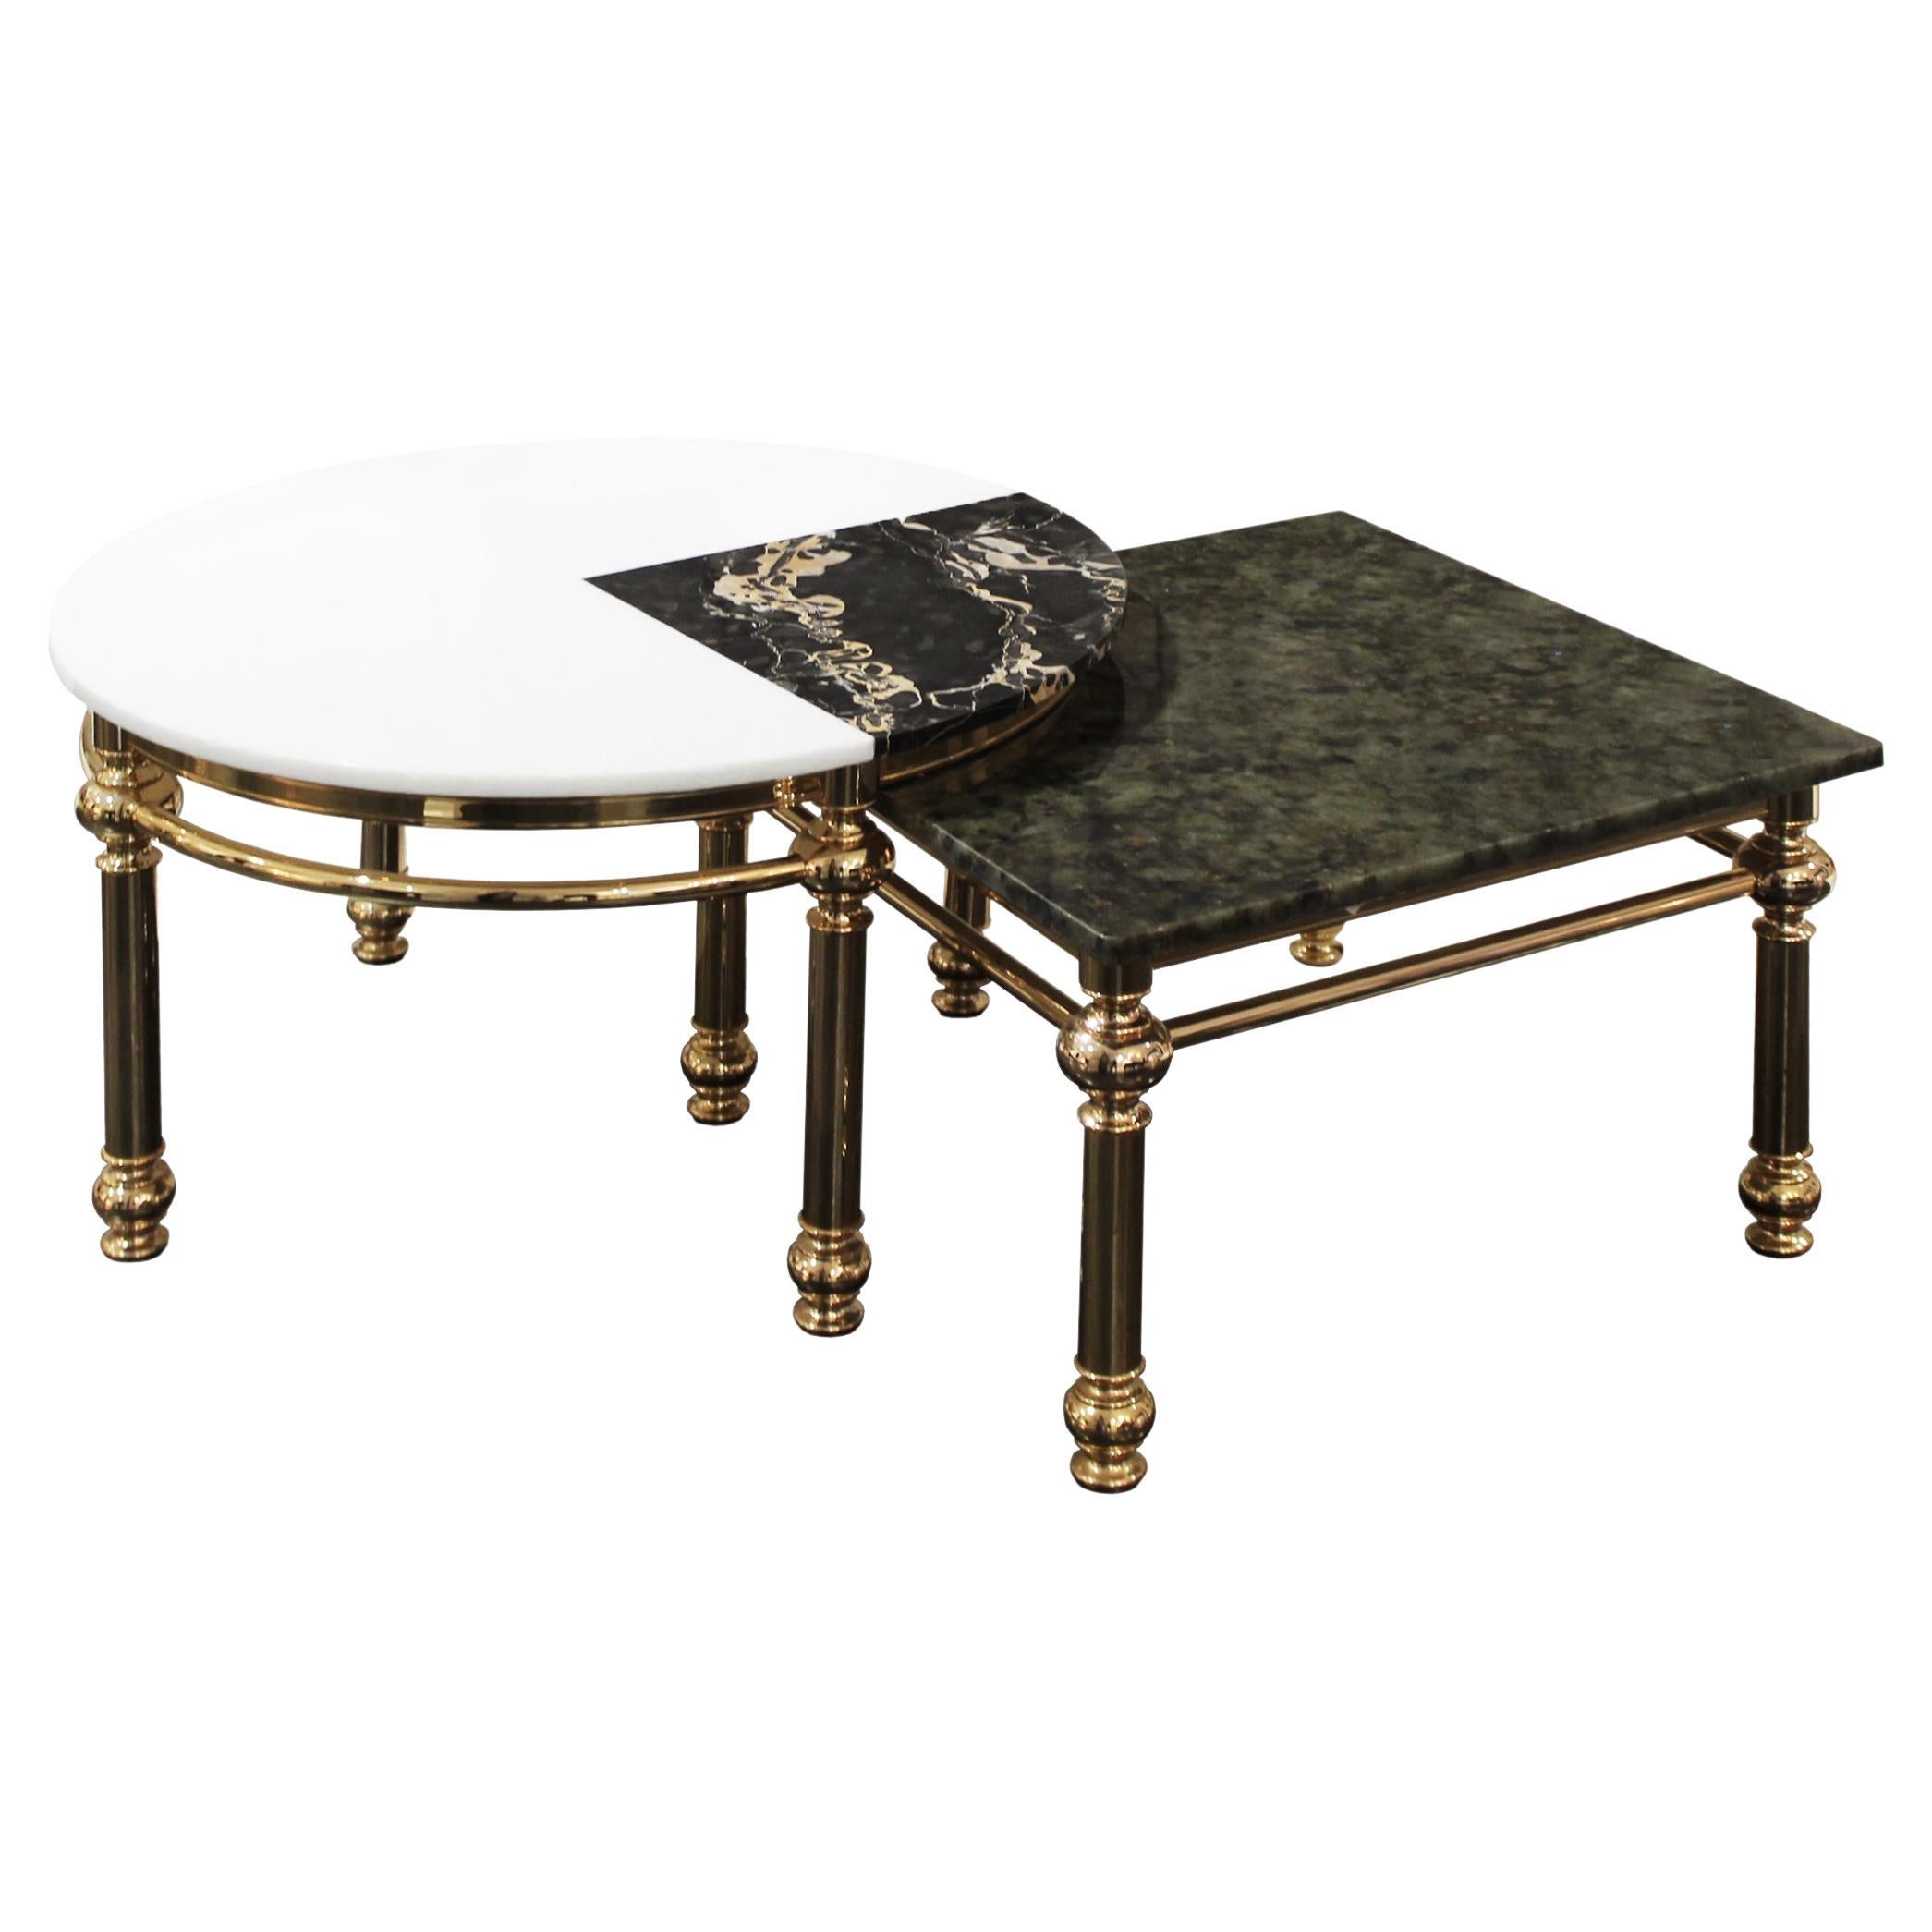 21st Century Laguna Coffee Table Set, Brass and Inlaid Marble Top, Made in Italy For Sale